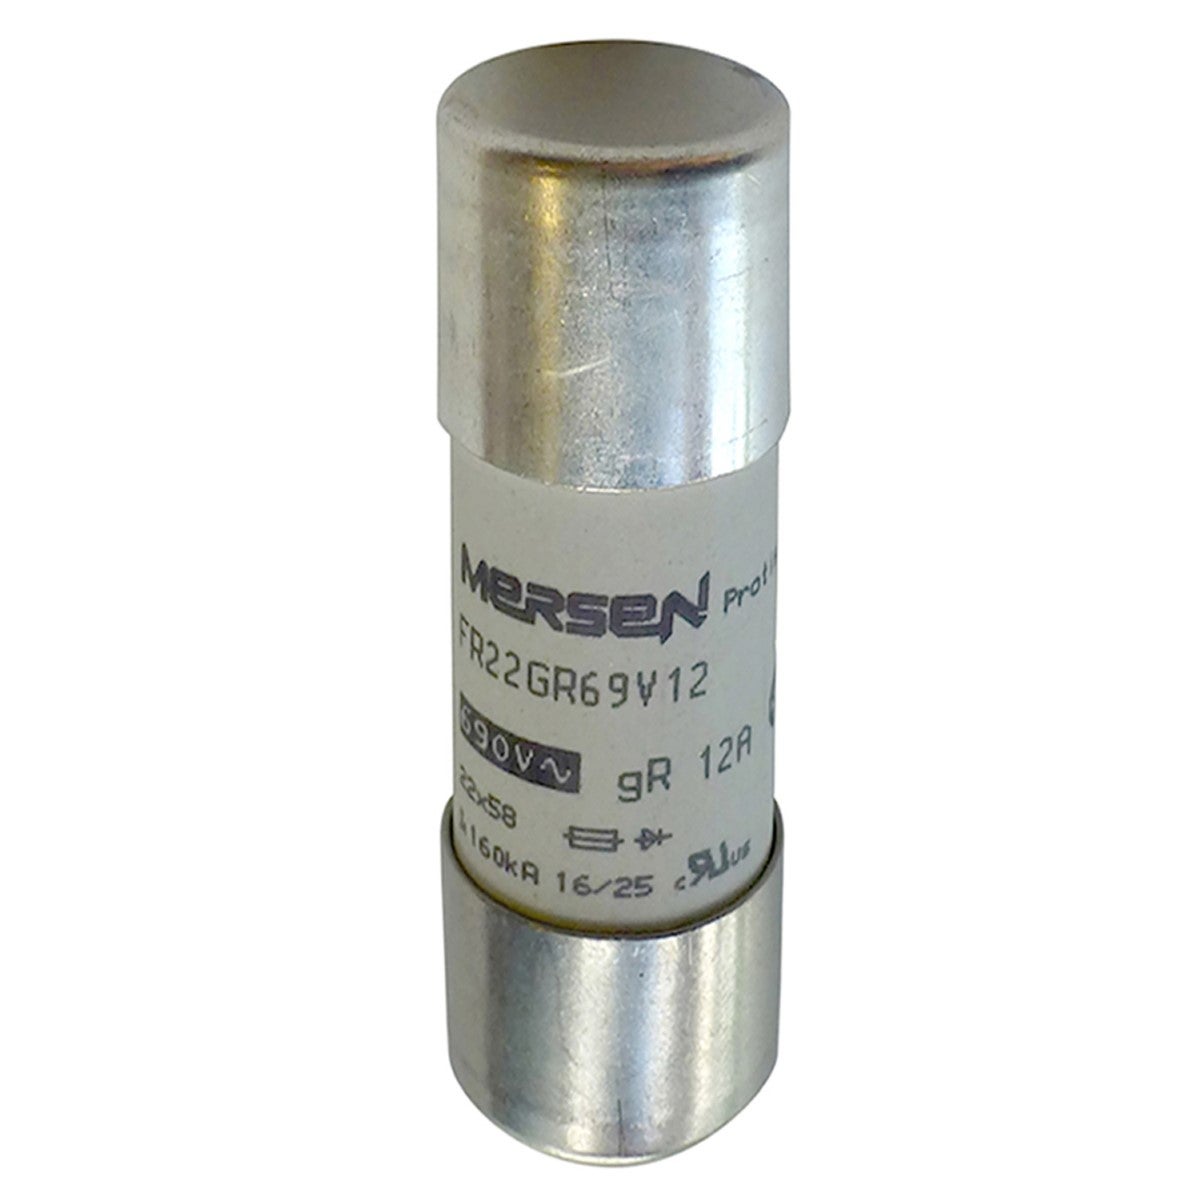 High speed fuse, 22X58, 80A